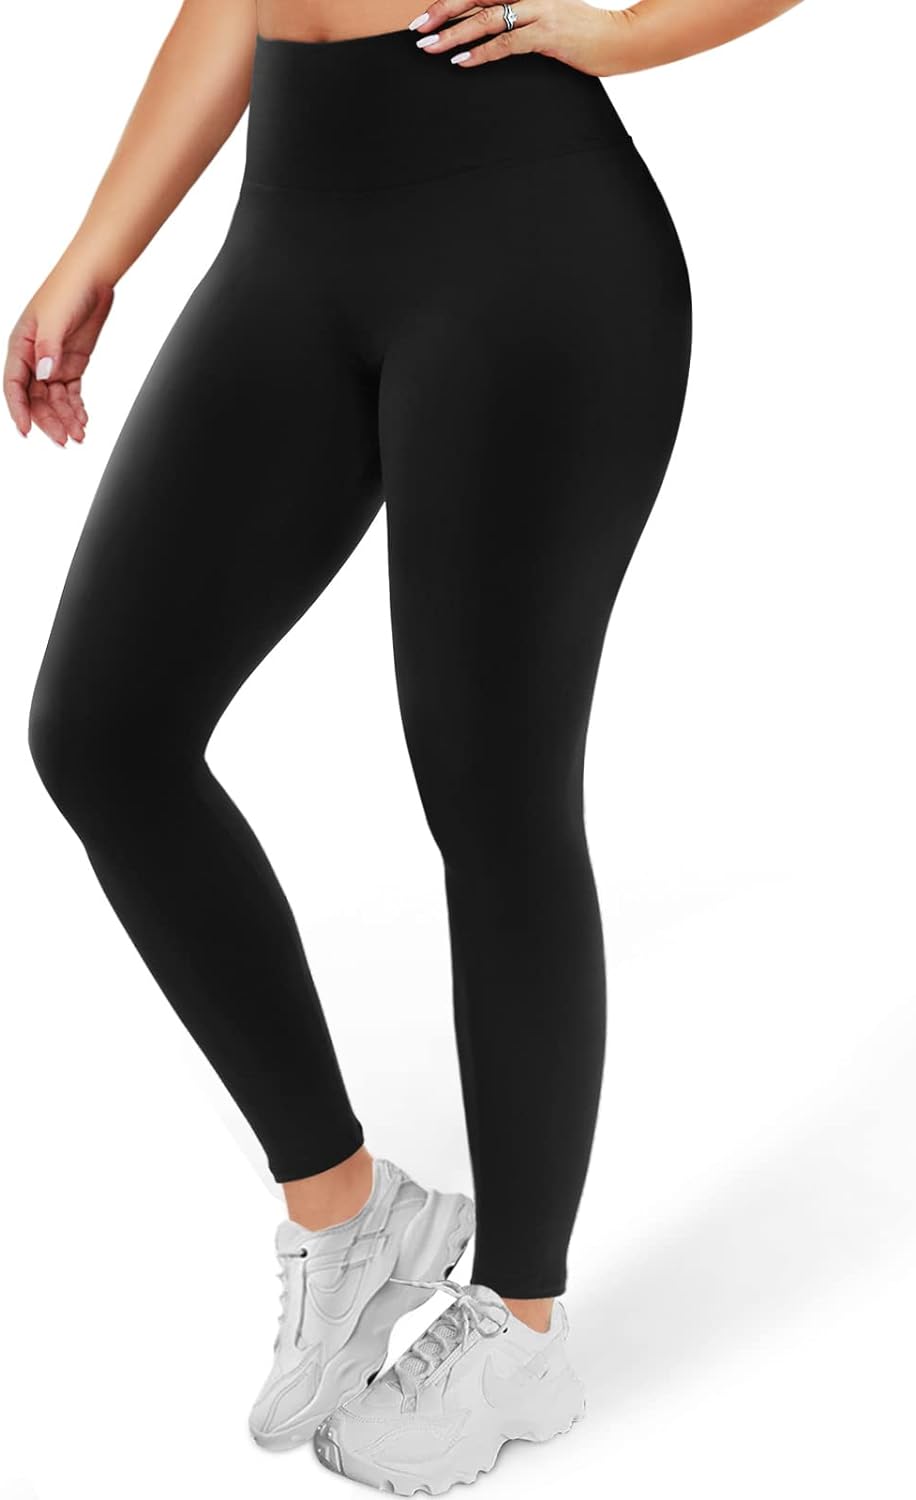 Happy.angel Plus Size Leggings with Pockets for Women, High Waisted Black Yoga Workout Leggings 3X 4X